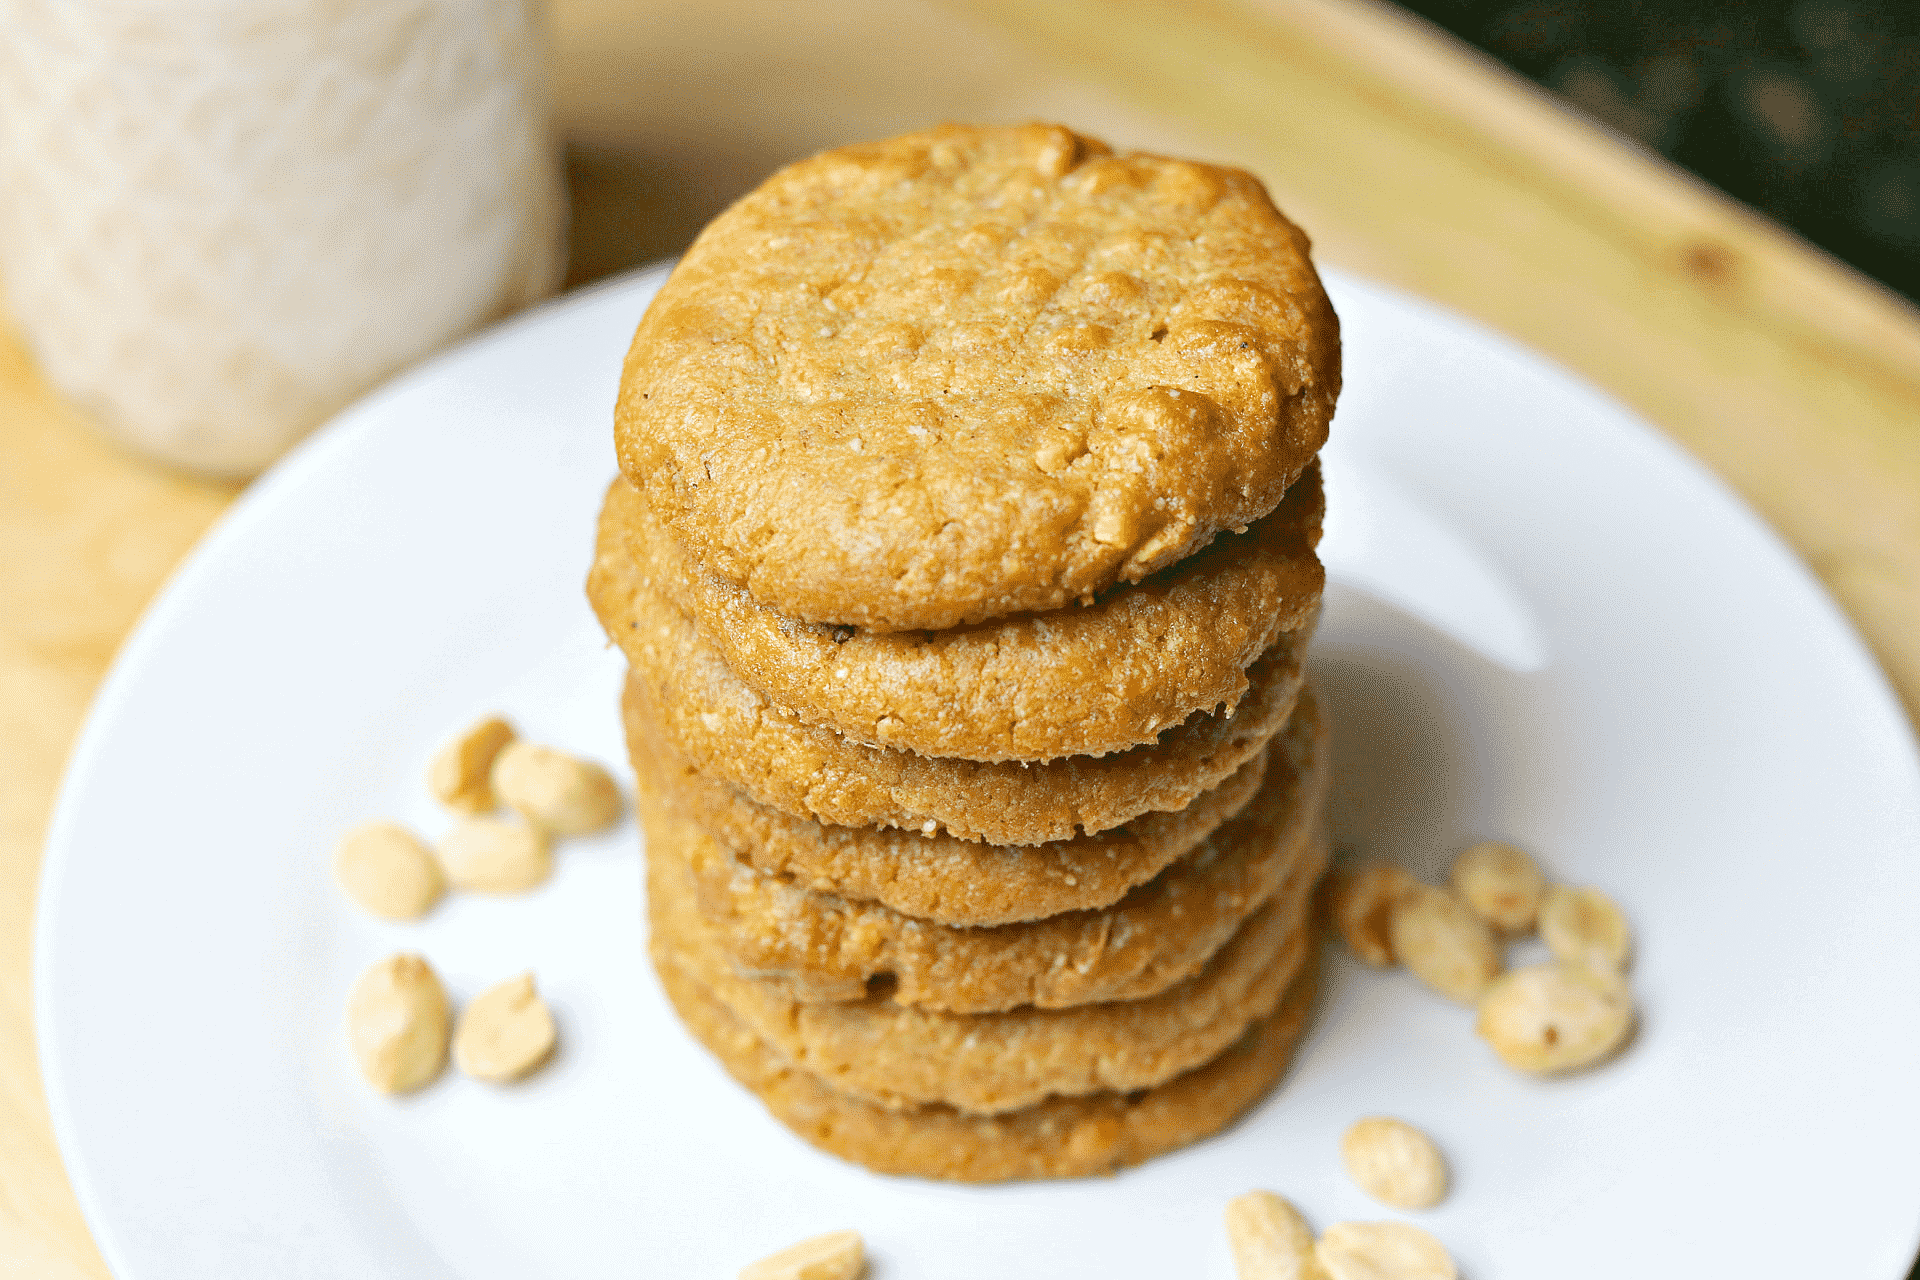 a stack of keto peanut butter cookies